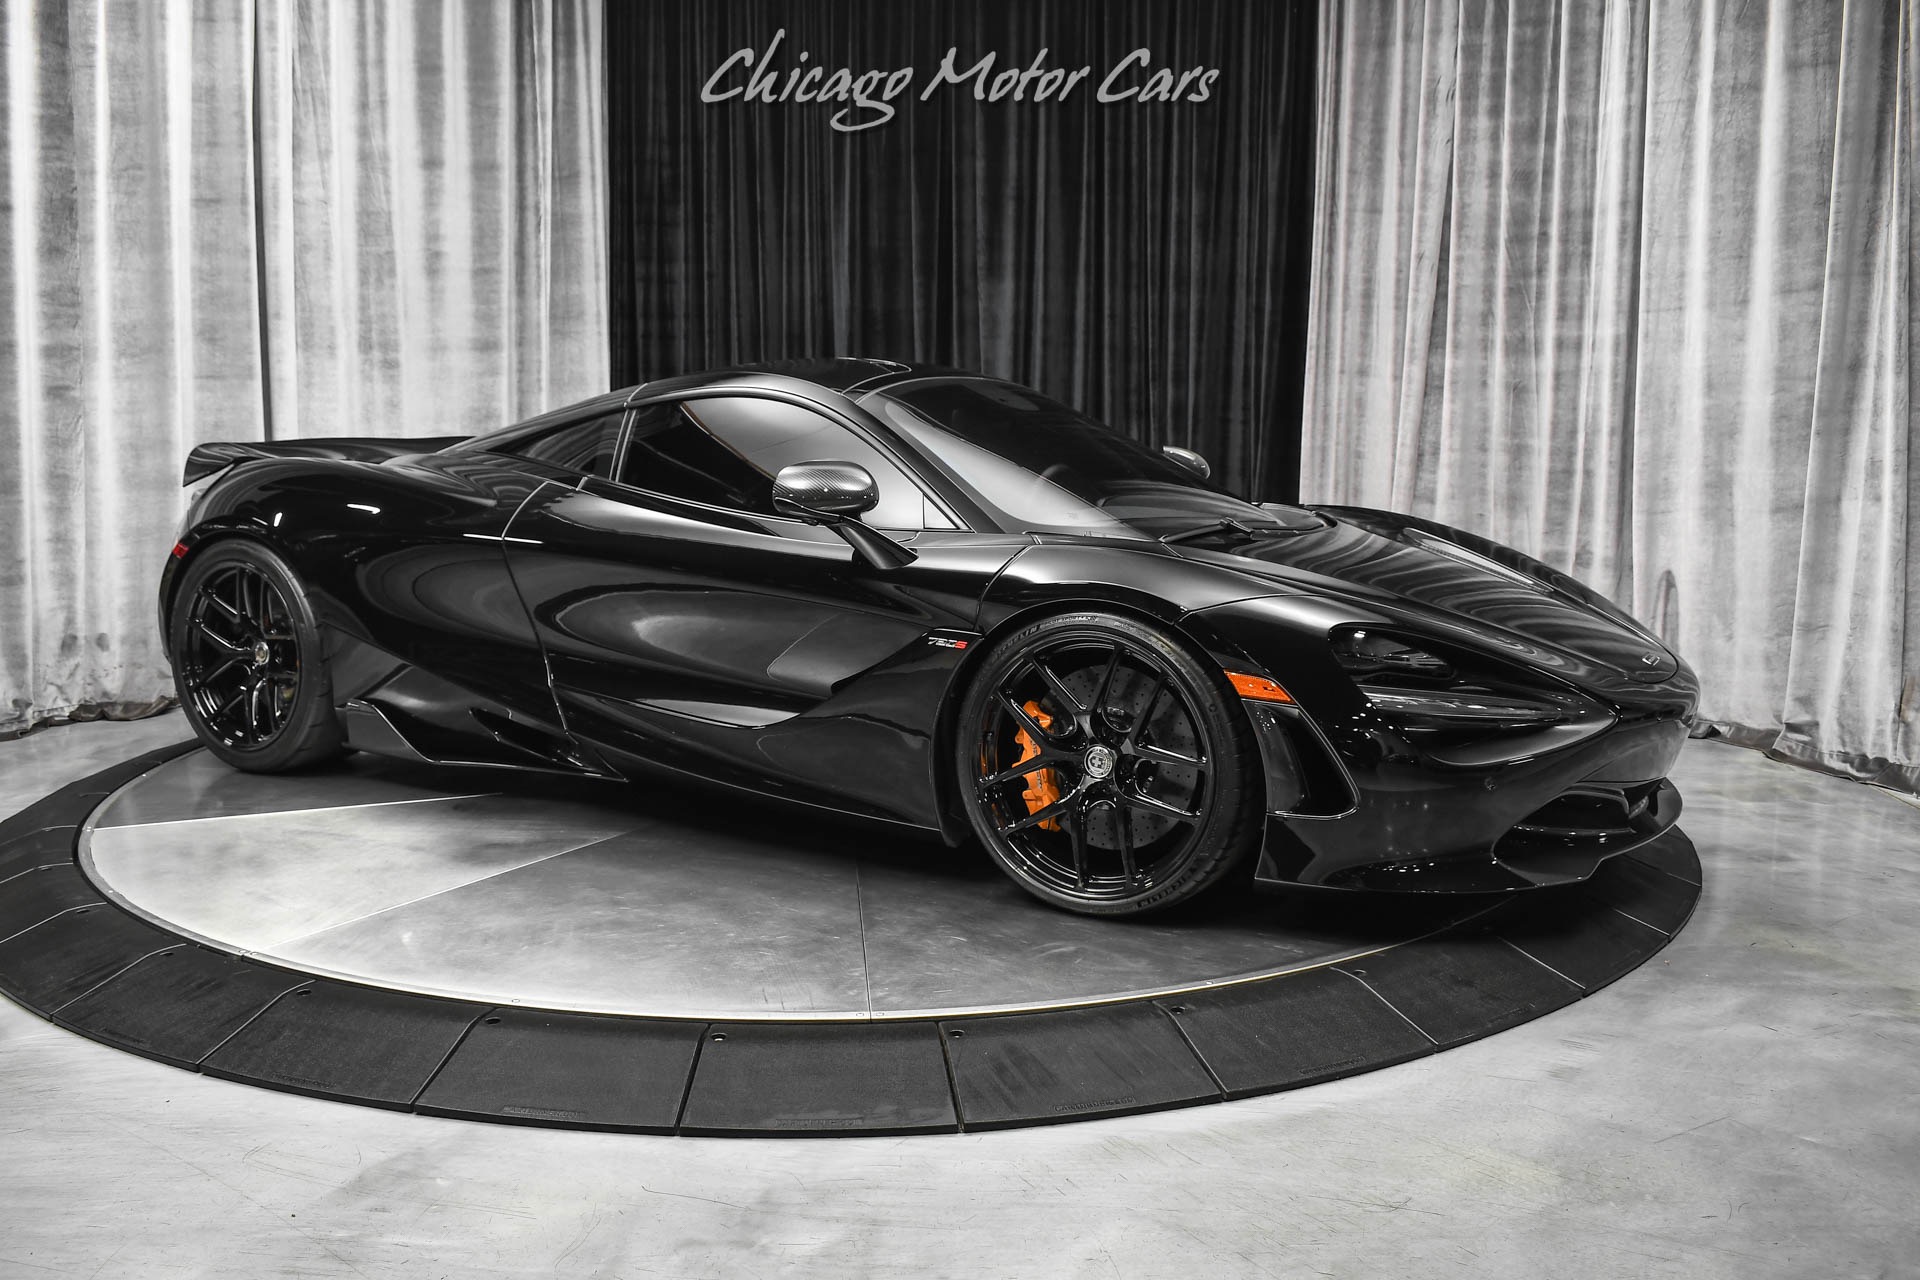 Used-2019-McLaren-720S-Coupe-Performance-900HP-M-Engineering-Tuned-HRE-WHEELS-LOADED